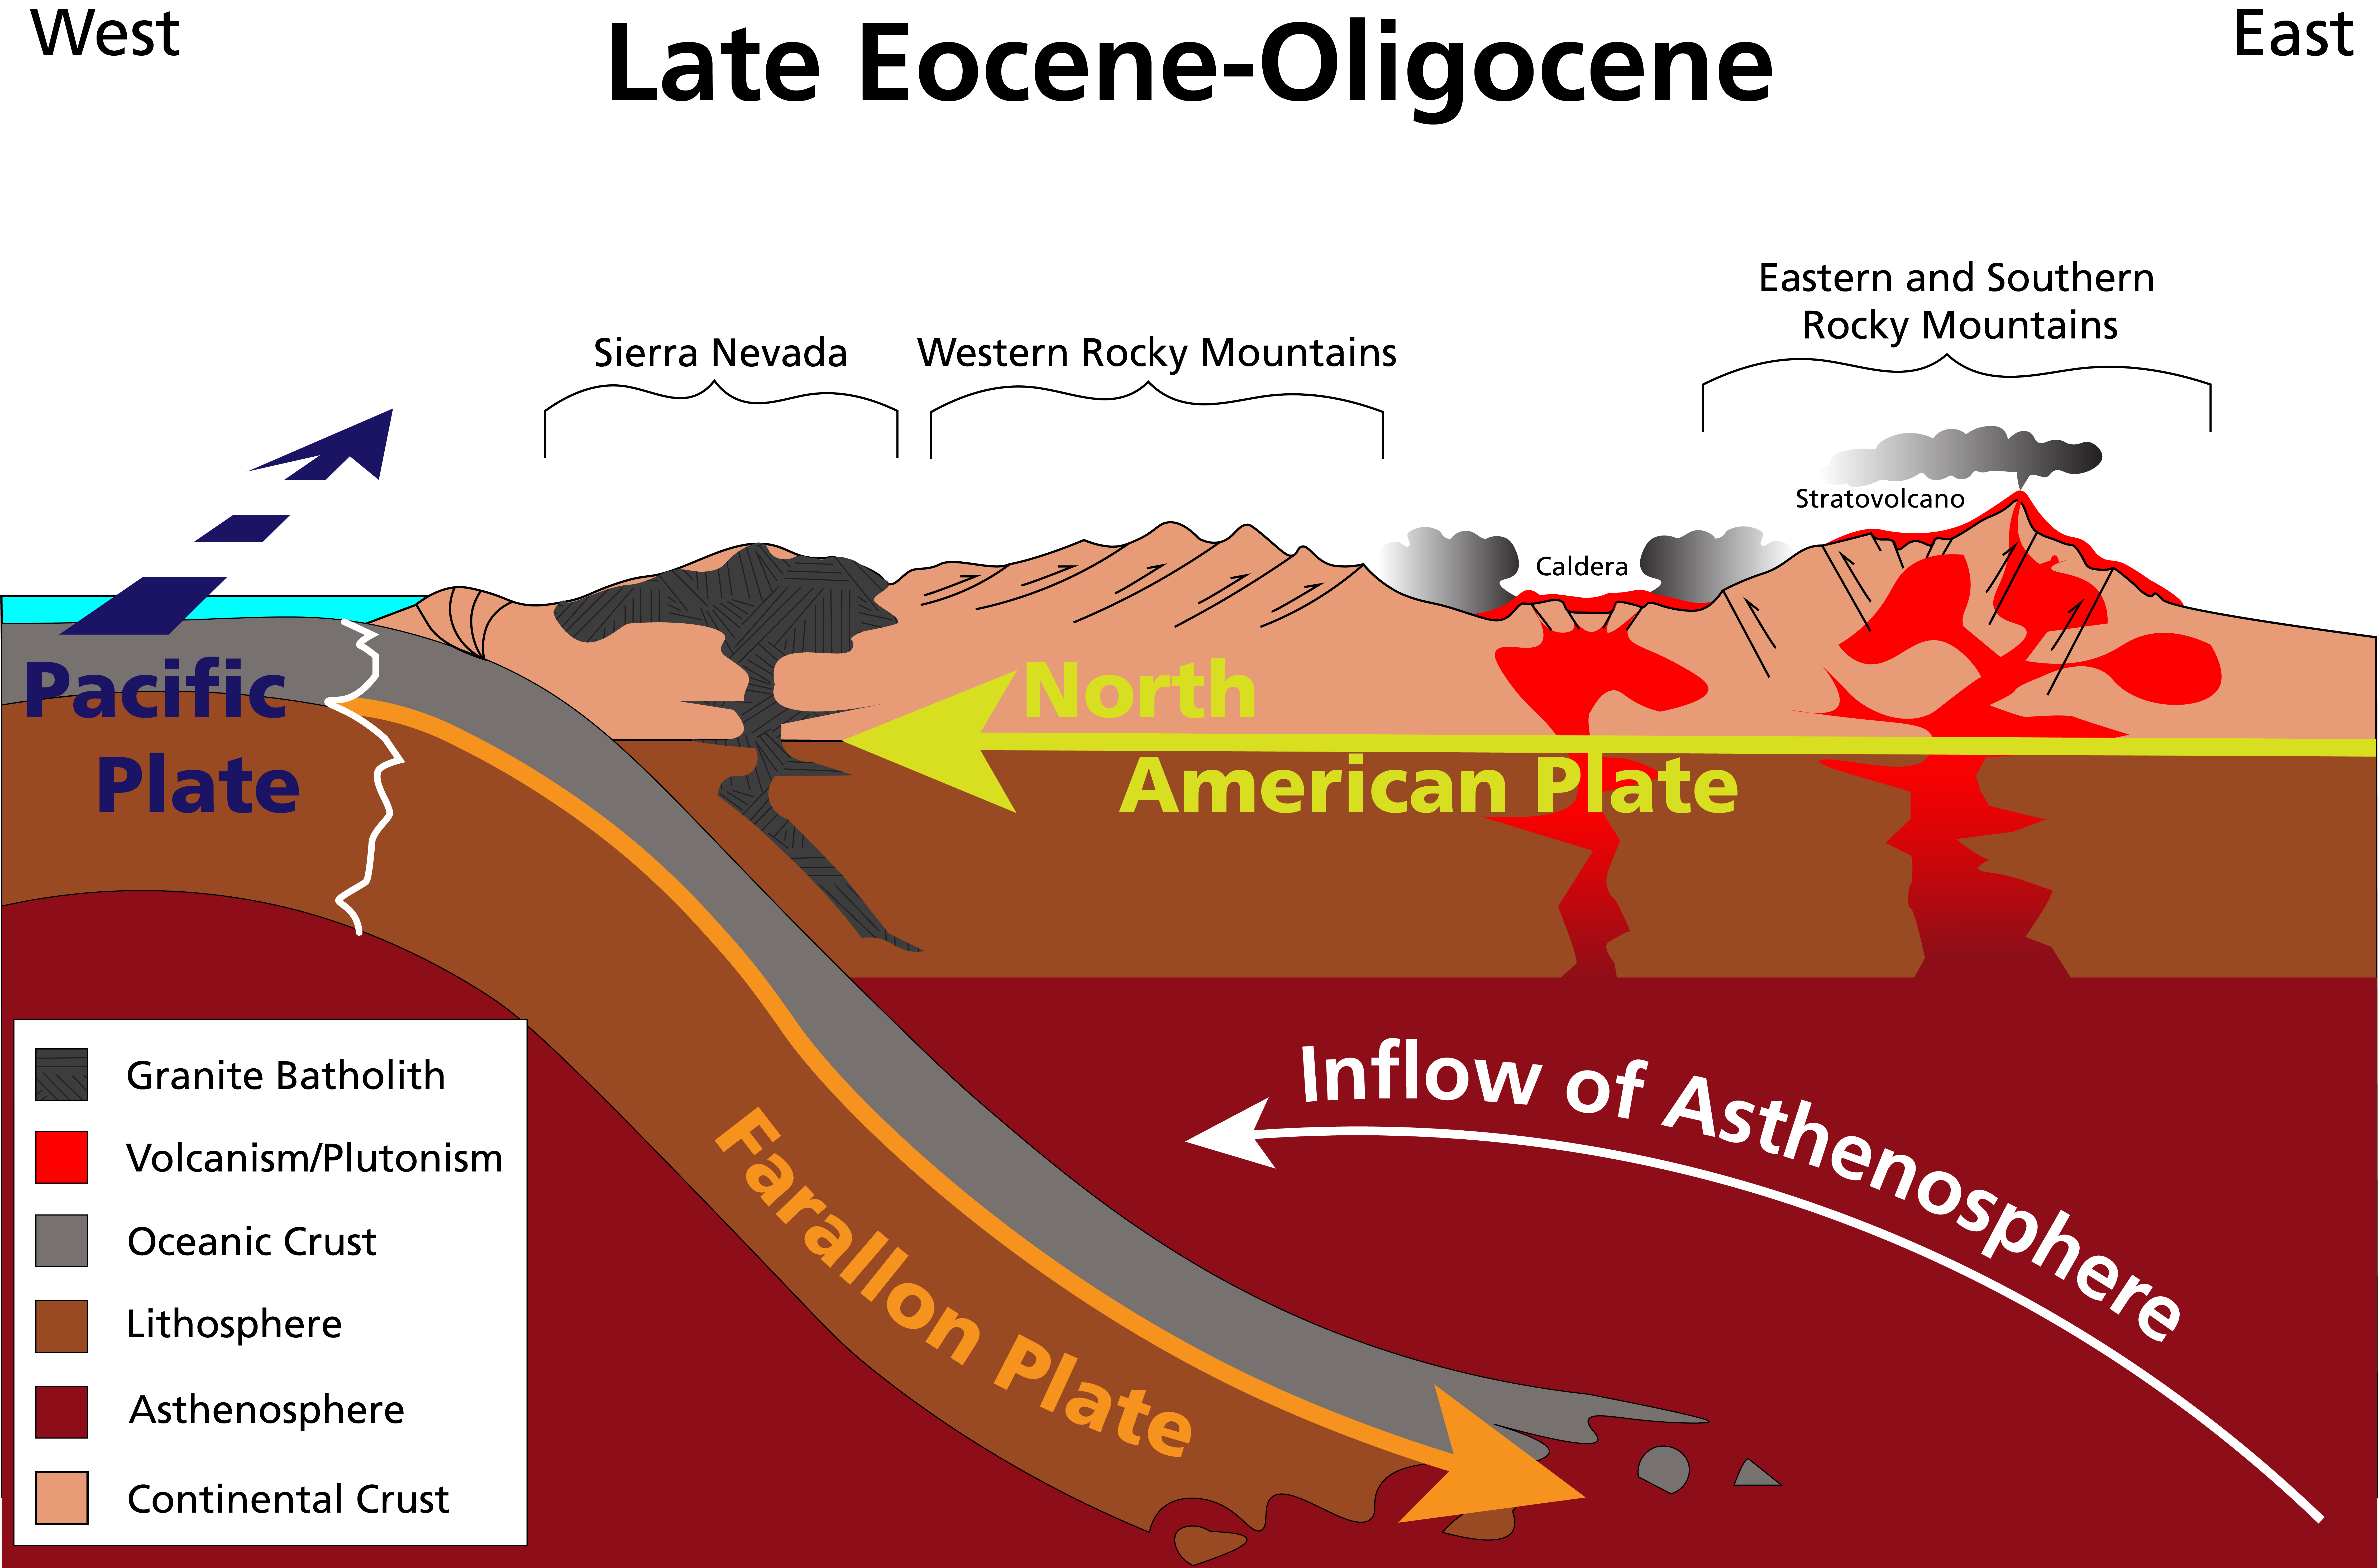 Schematic diagram illustrating the subduction of the Farallon plate under the North American plate and subsequent eruption of the Wall Mountain Tuff.